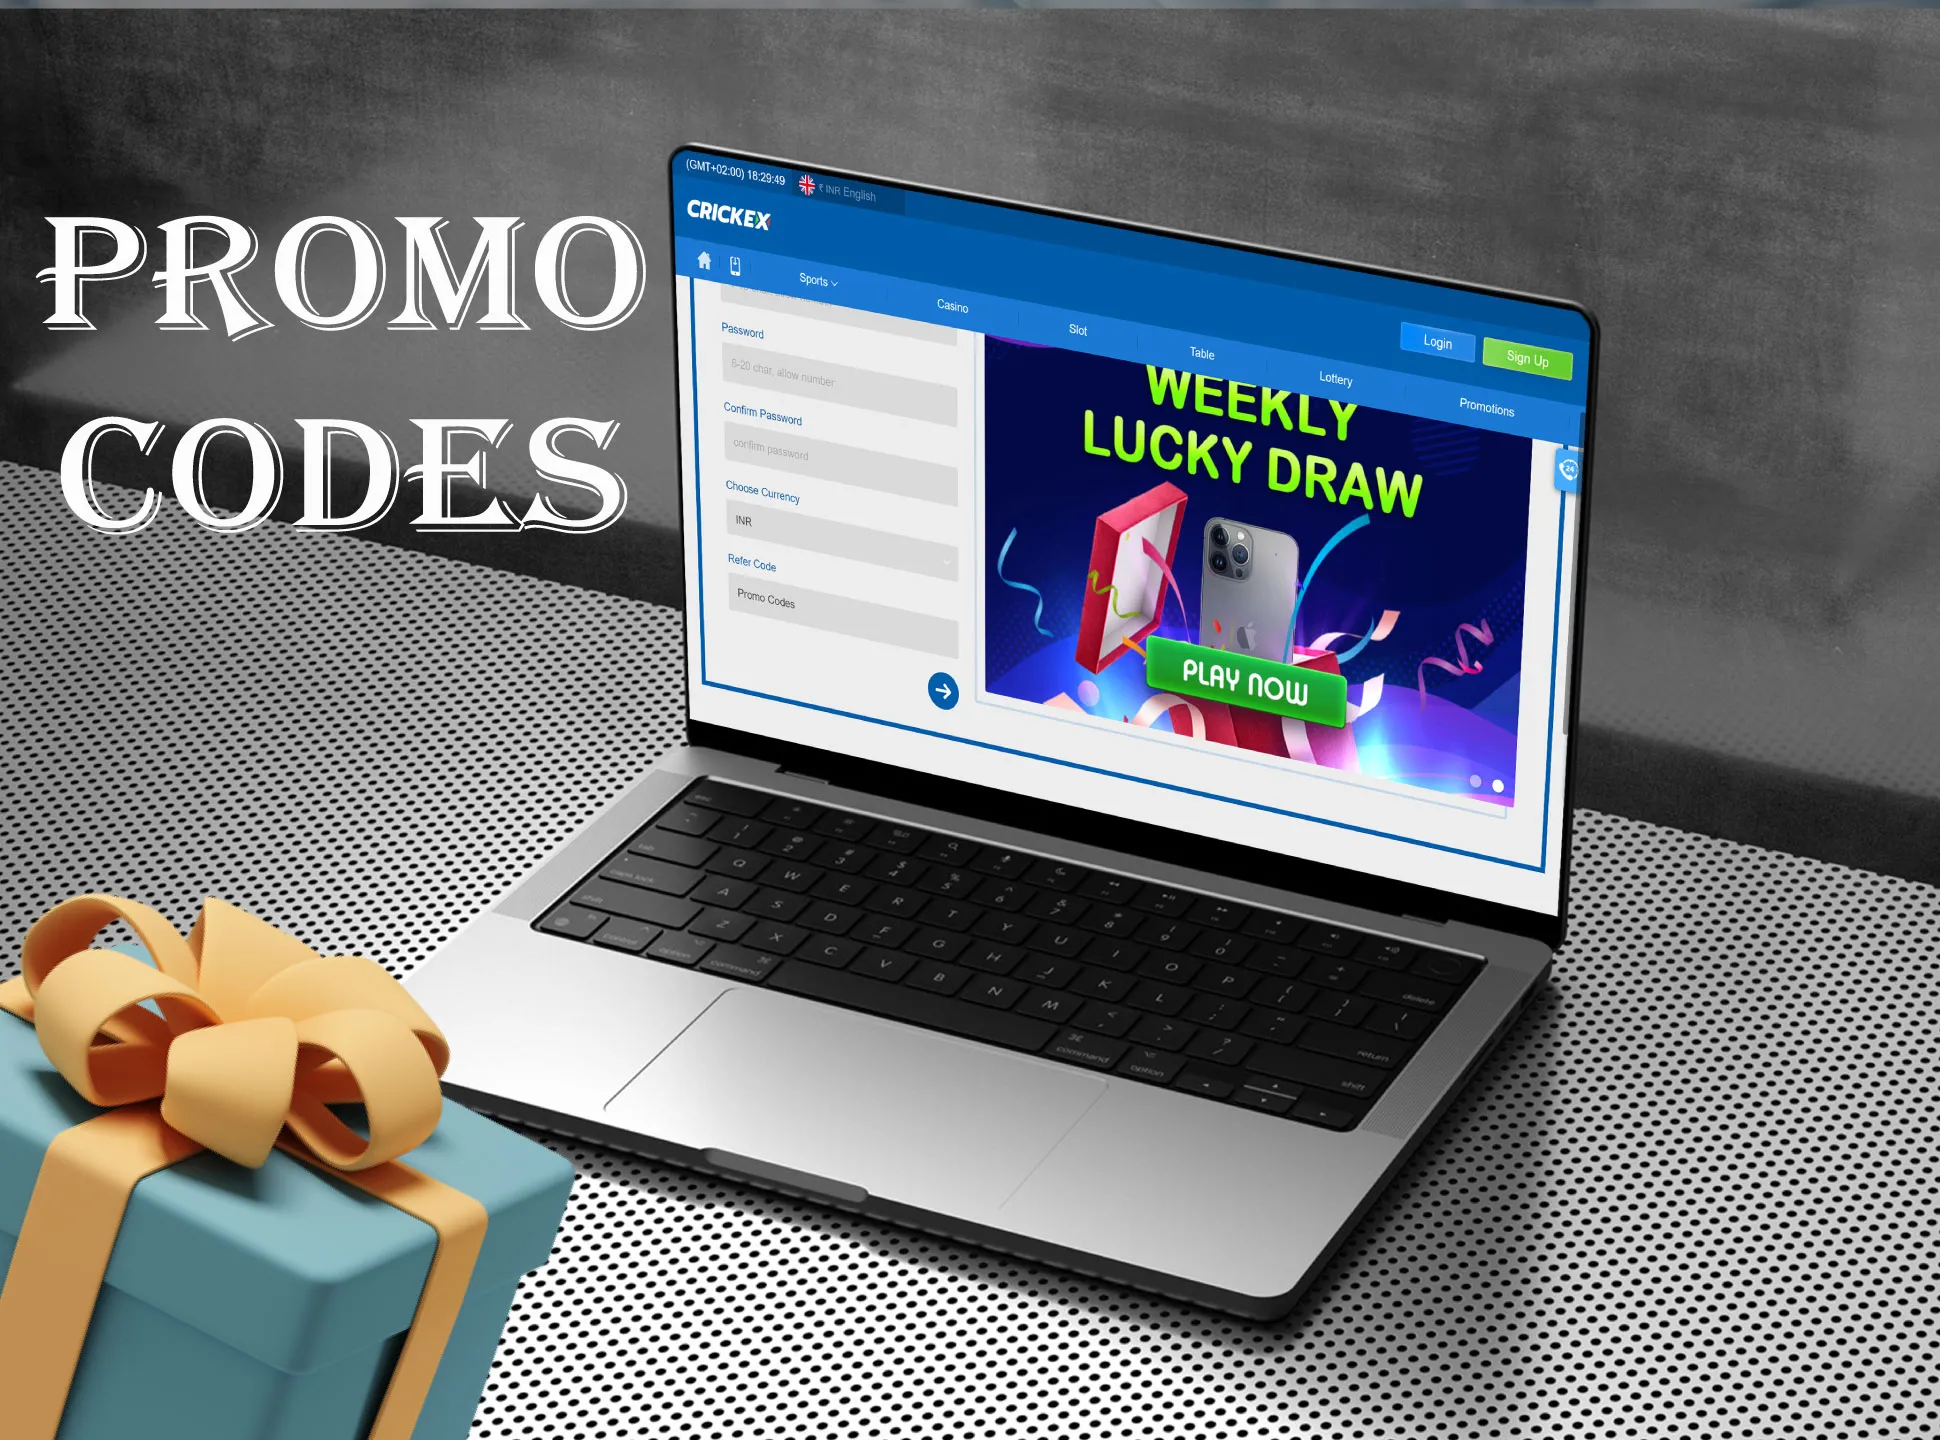 Promo codes help you get even more money from the welcome bonuses or receive other bonuses from the cricket betting sites.